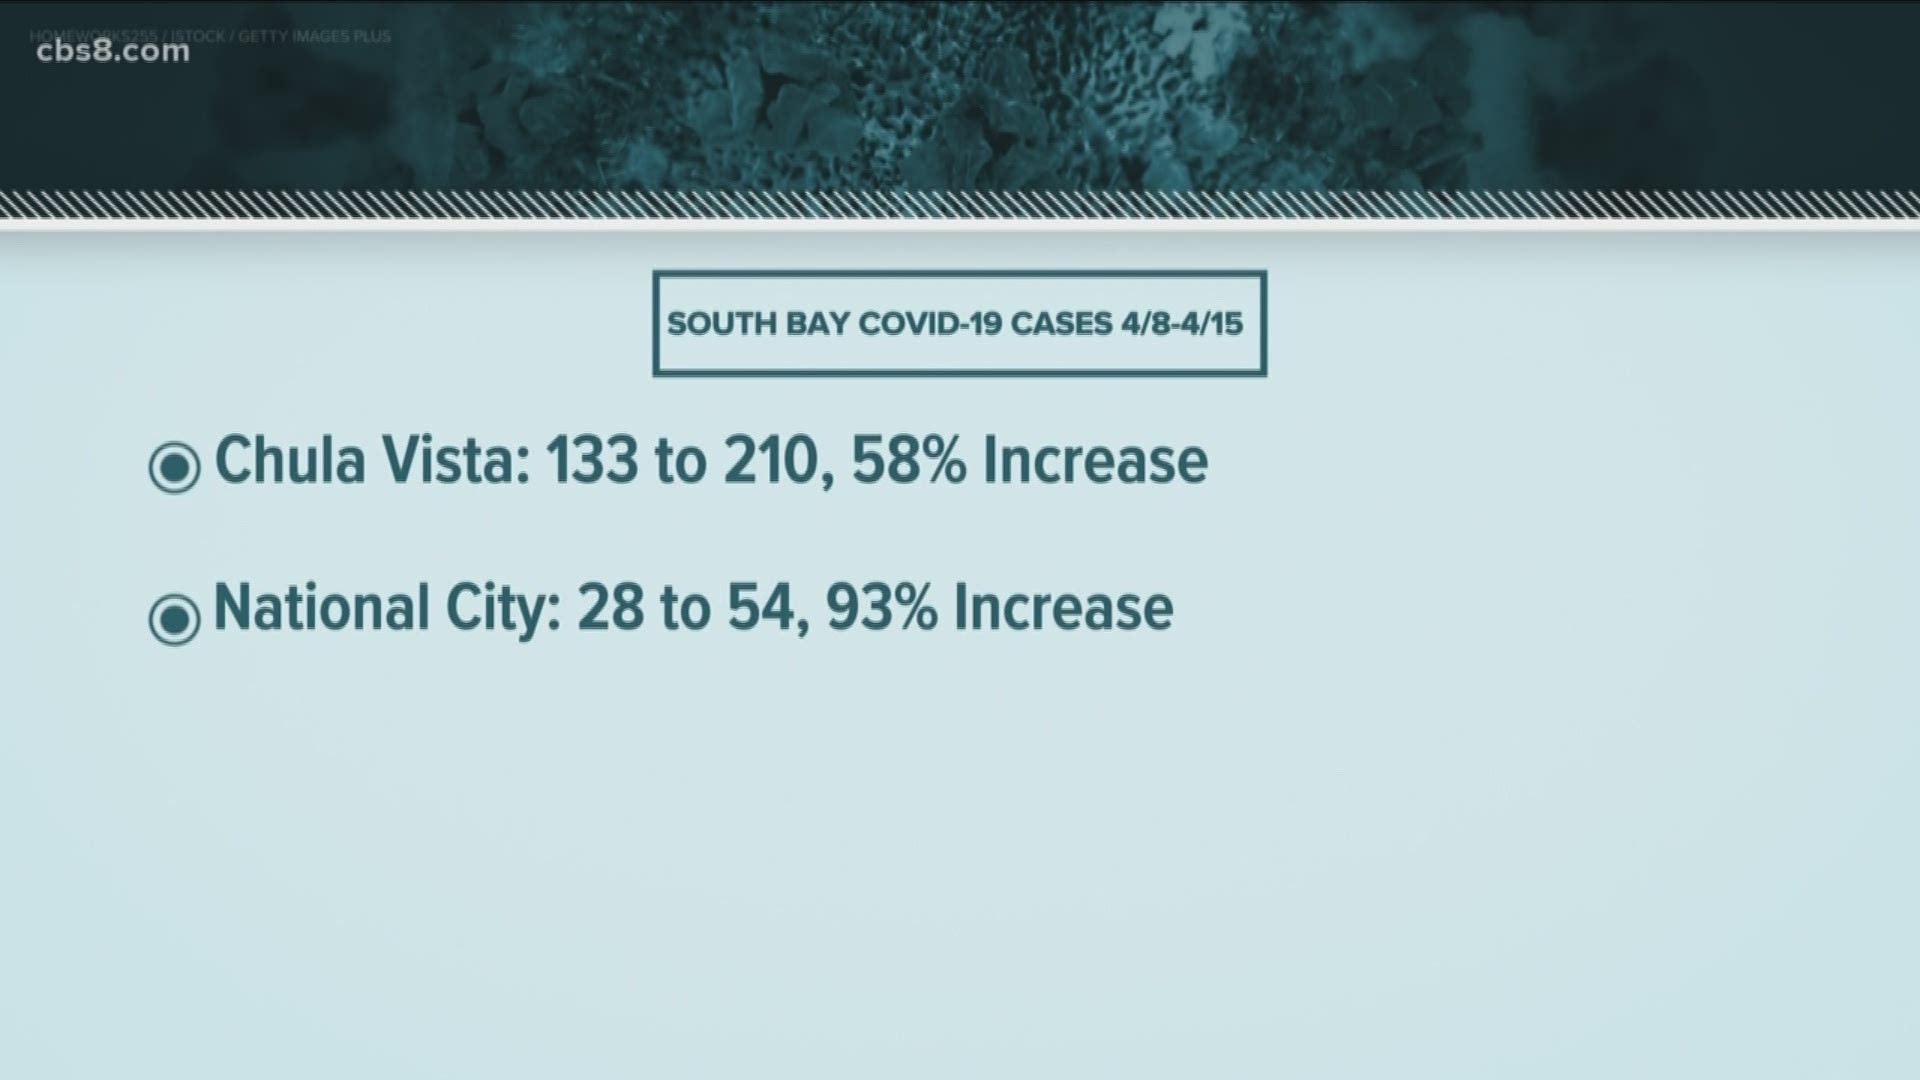 During a 7-day period in April, Chula Vista had a 58% increase in positive cases while National City saw a 93% increase.